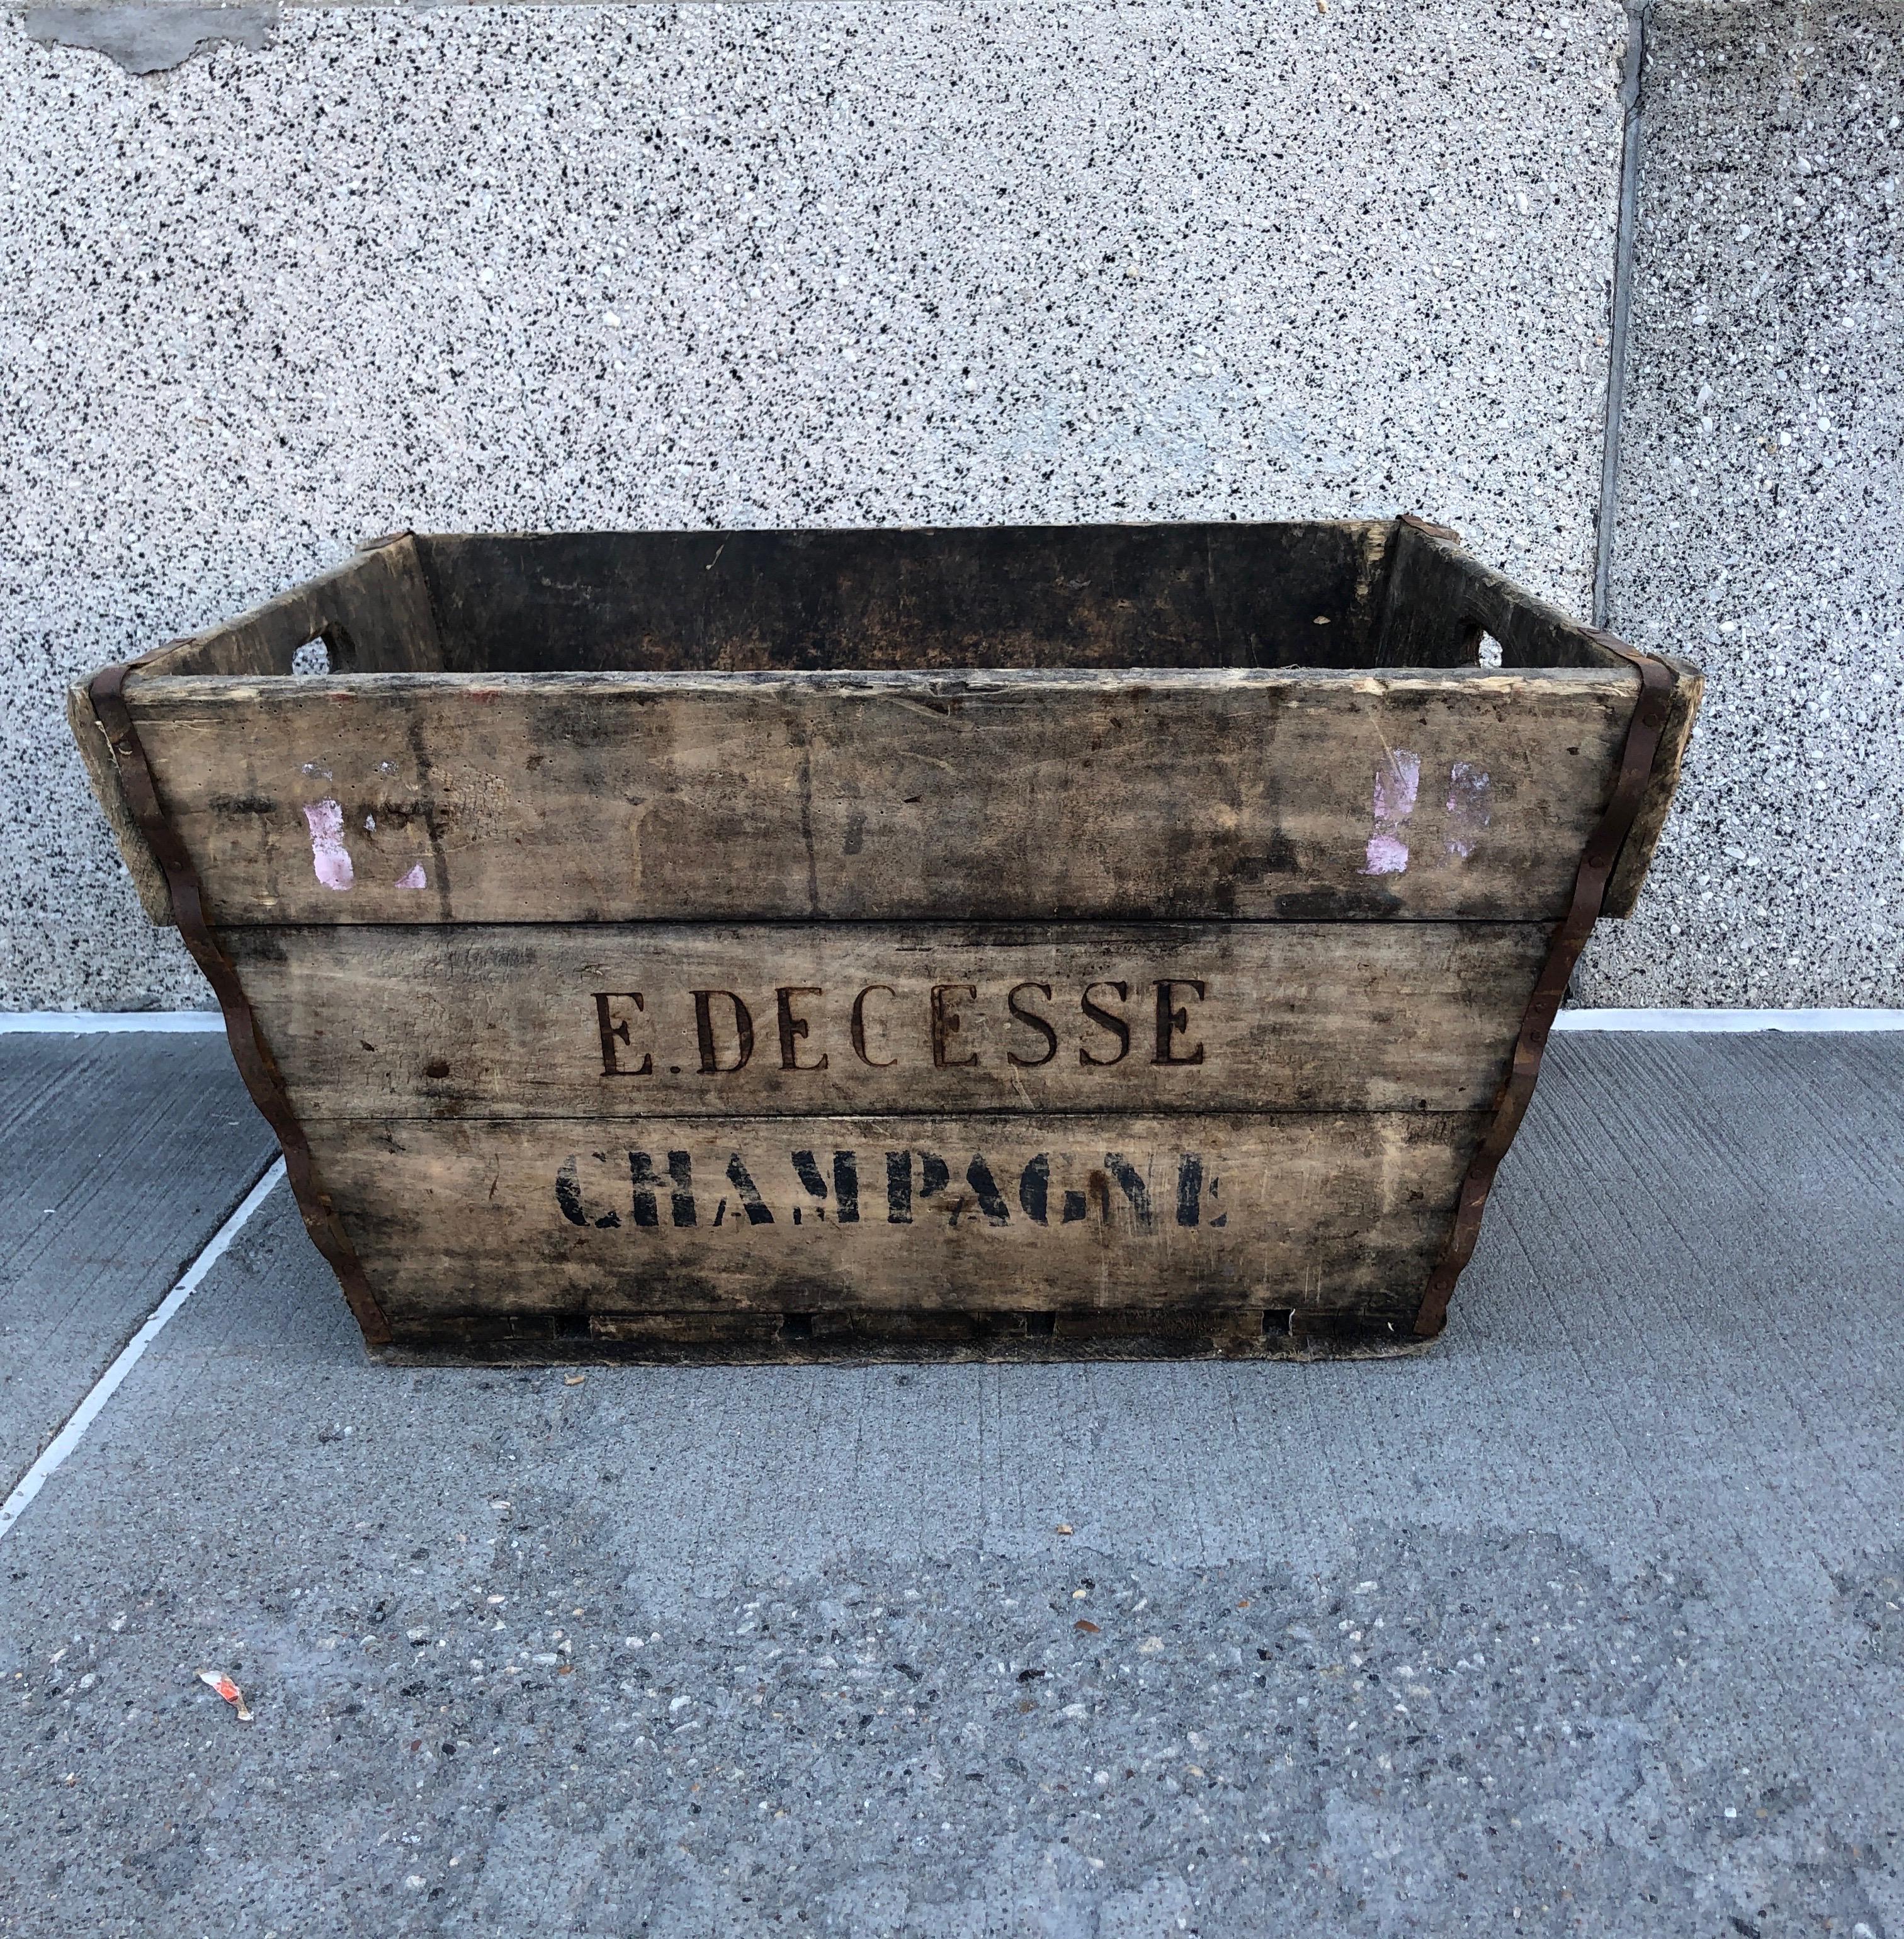 A stunning, beautifully worn wooden vintage champagne harvest basket with stenciled name of vineyard prominently featured on both sides. This sturdy, large wooden box is a natural for firewood, or as an entry way piece to hold shoes, toys, or